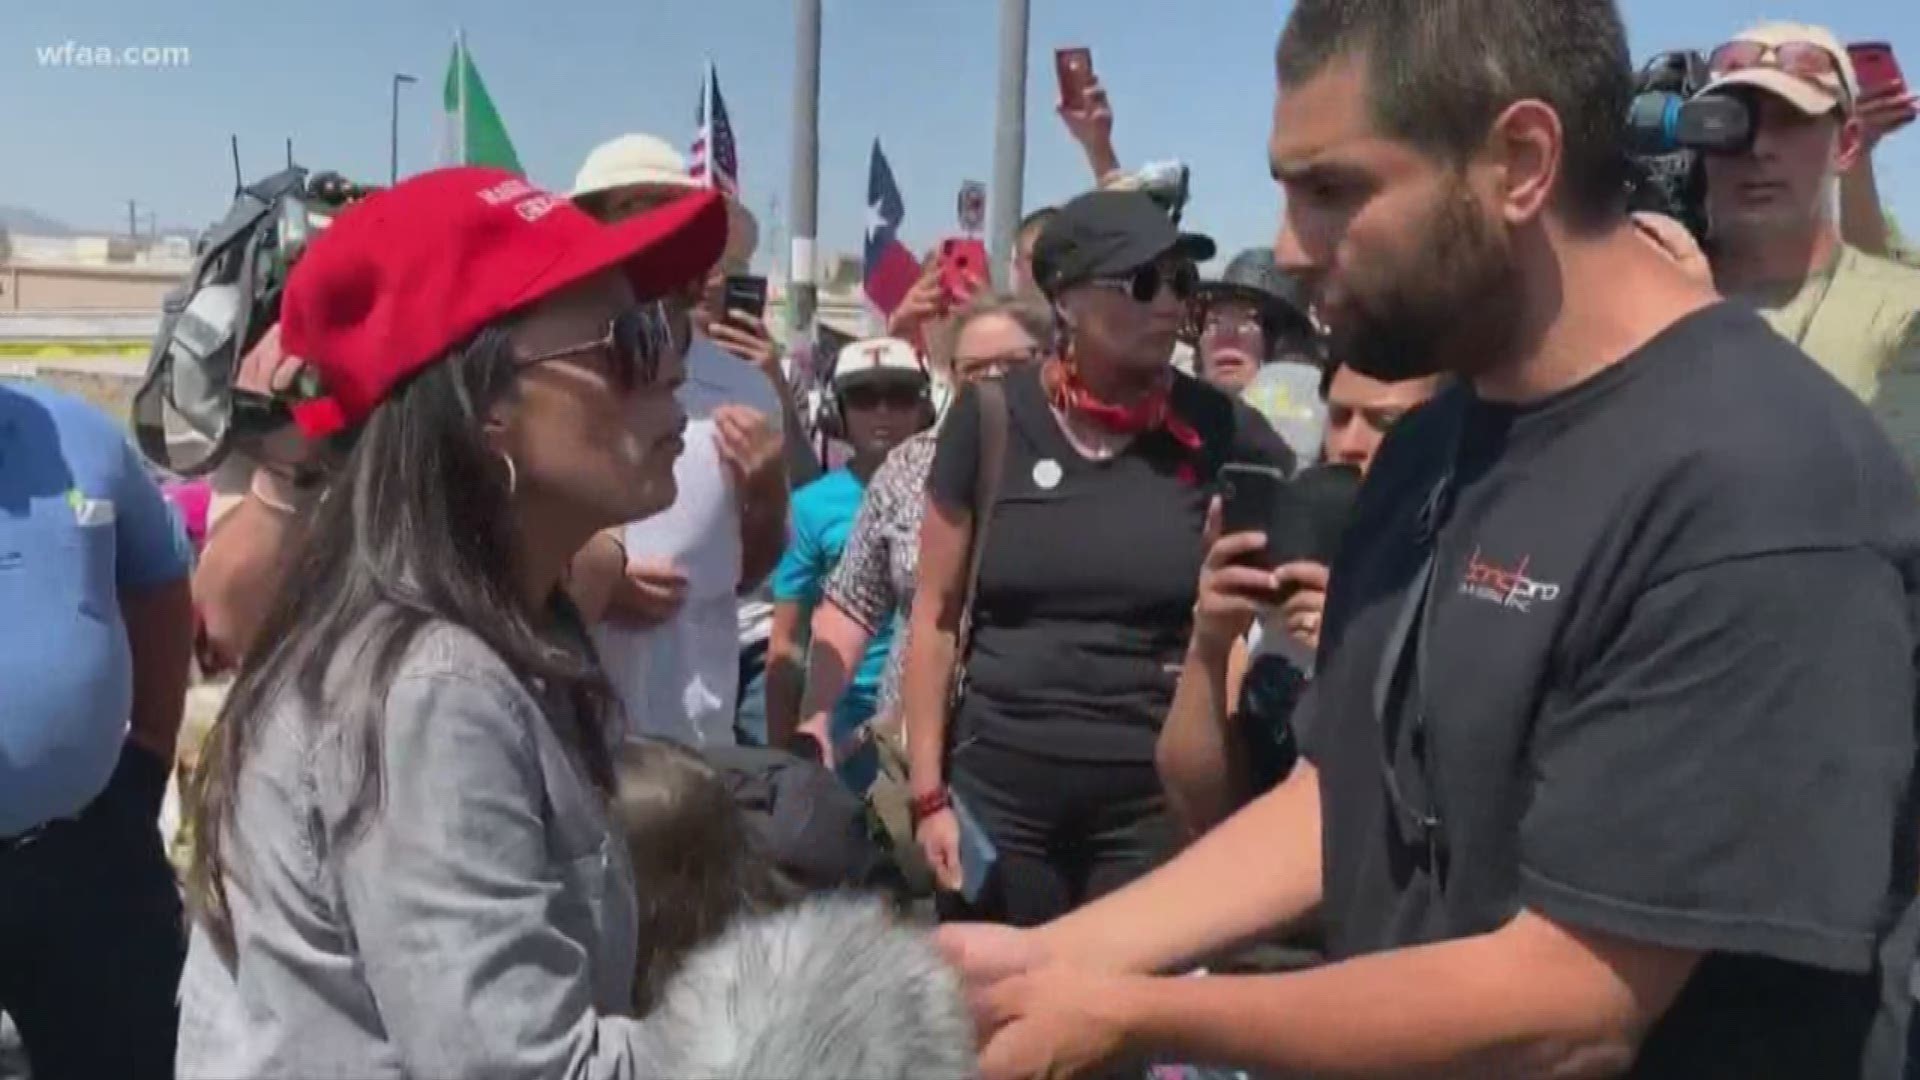 President Trump's visit to El Paso brought out high emotions.